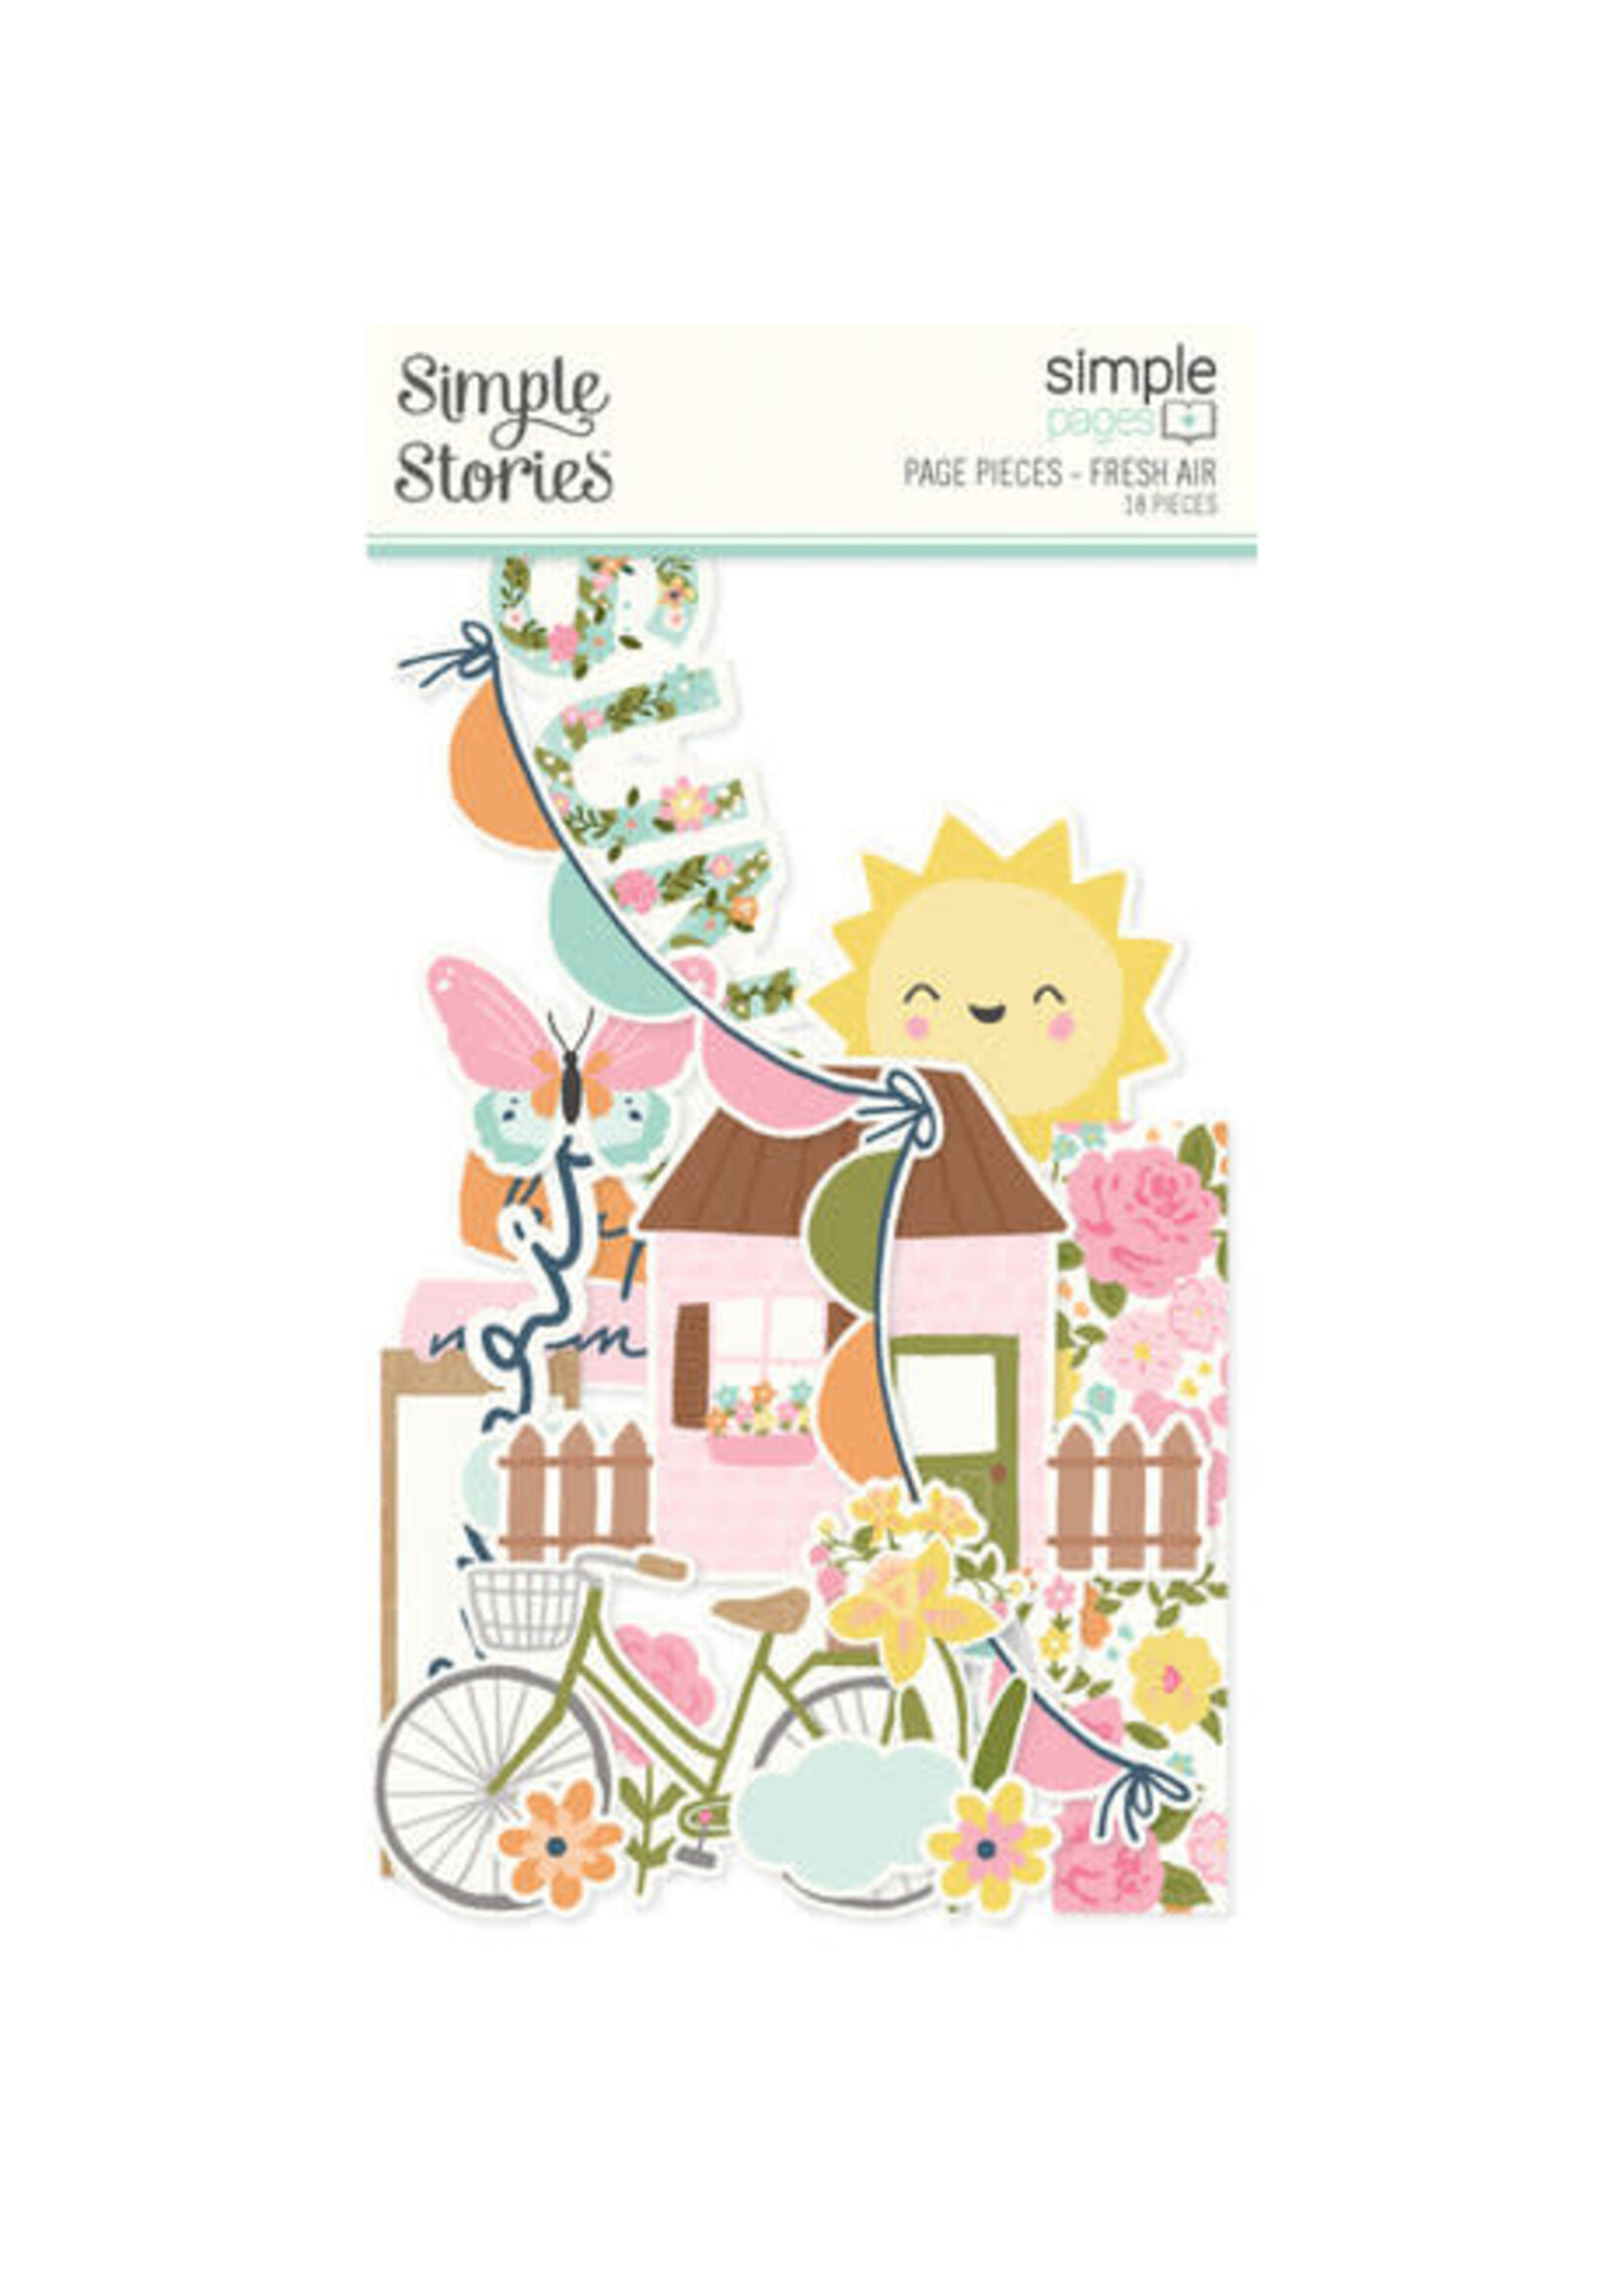 simple stories Fresh Air Simple Pages Pieces (21629)